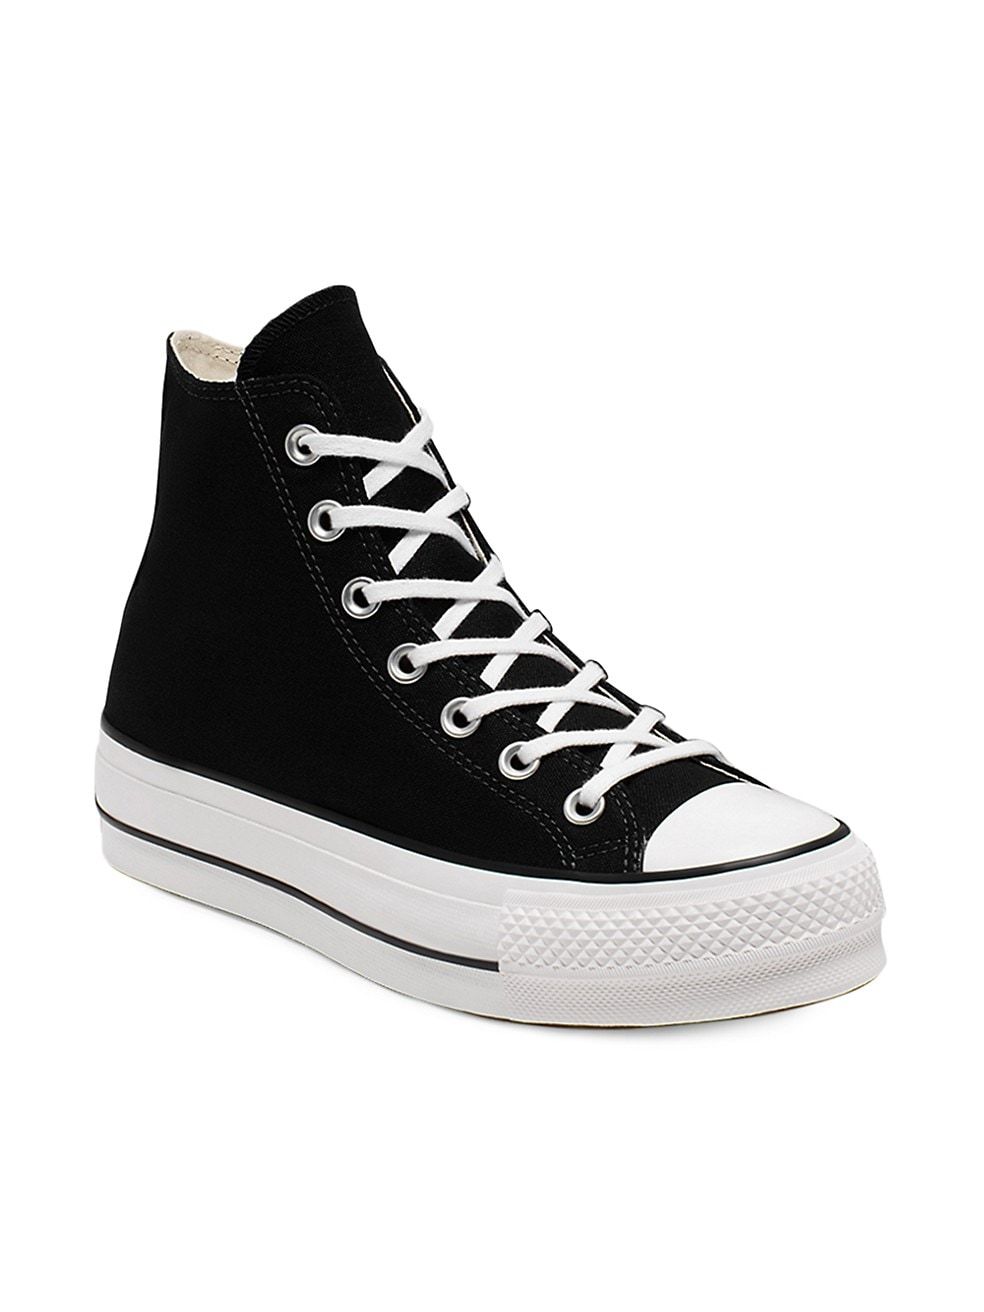 Converse Chuck Taylor All Star Platform High-Top Sneakers | Saks Fifth Avenue